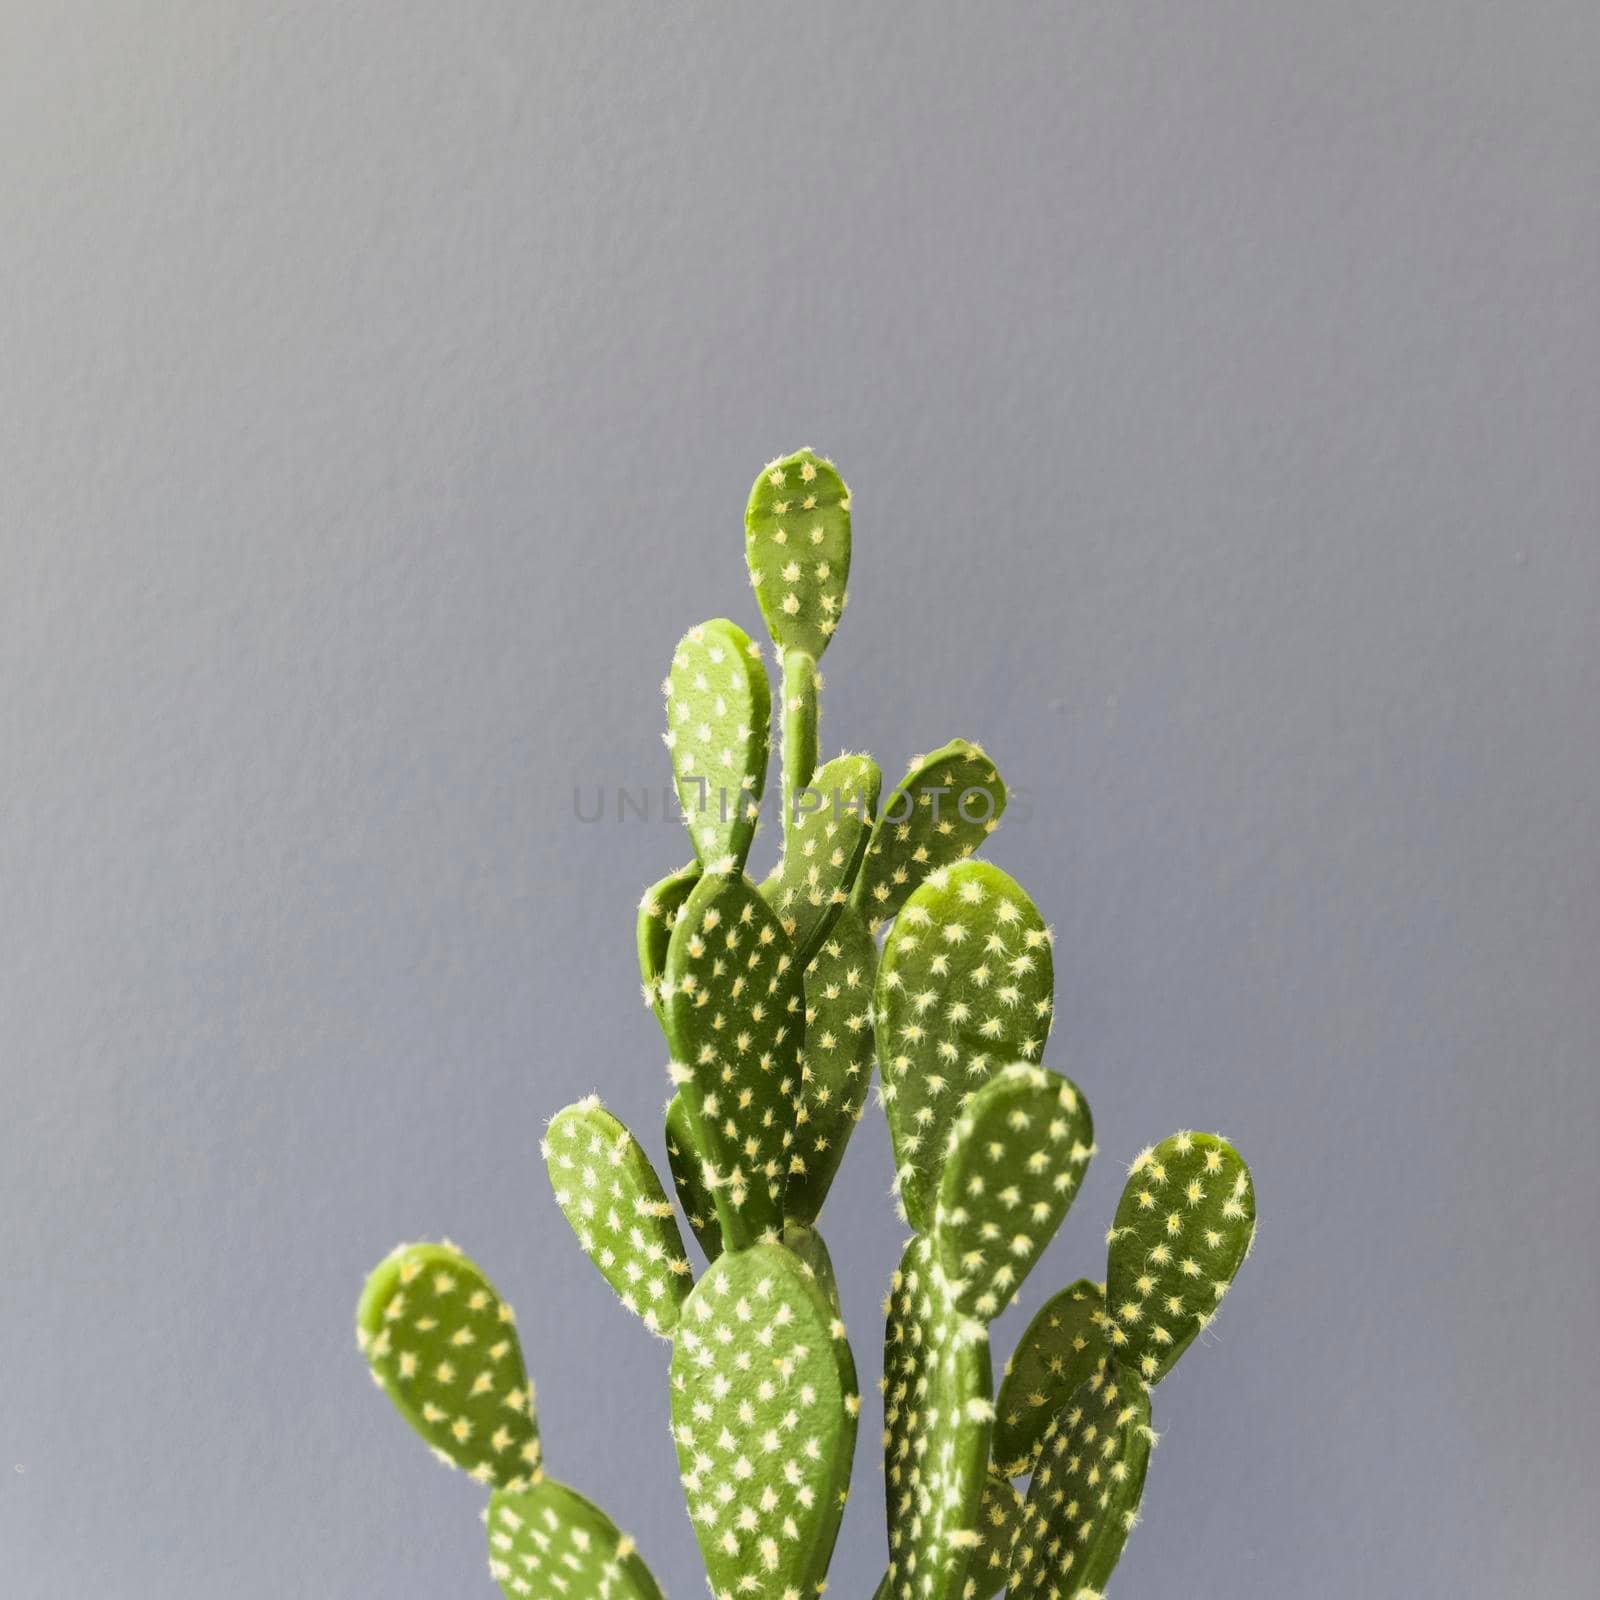 office cactus. High quality photo by Zahard